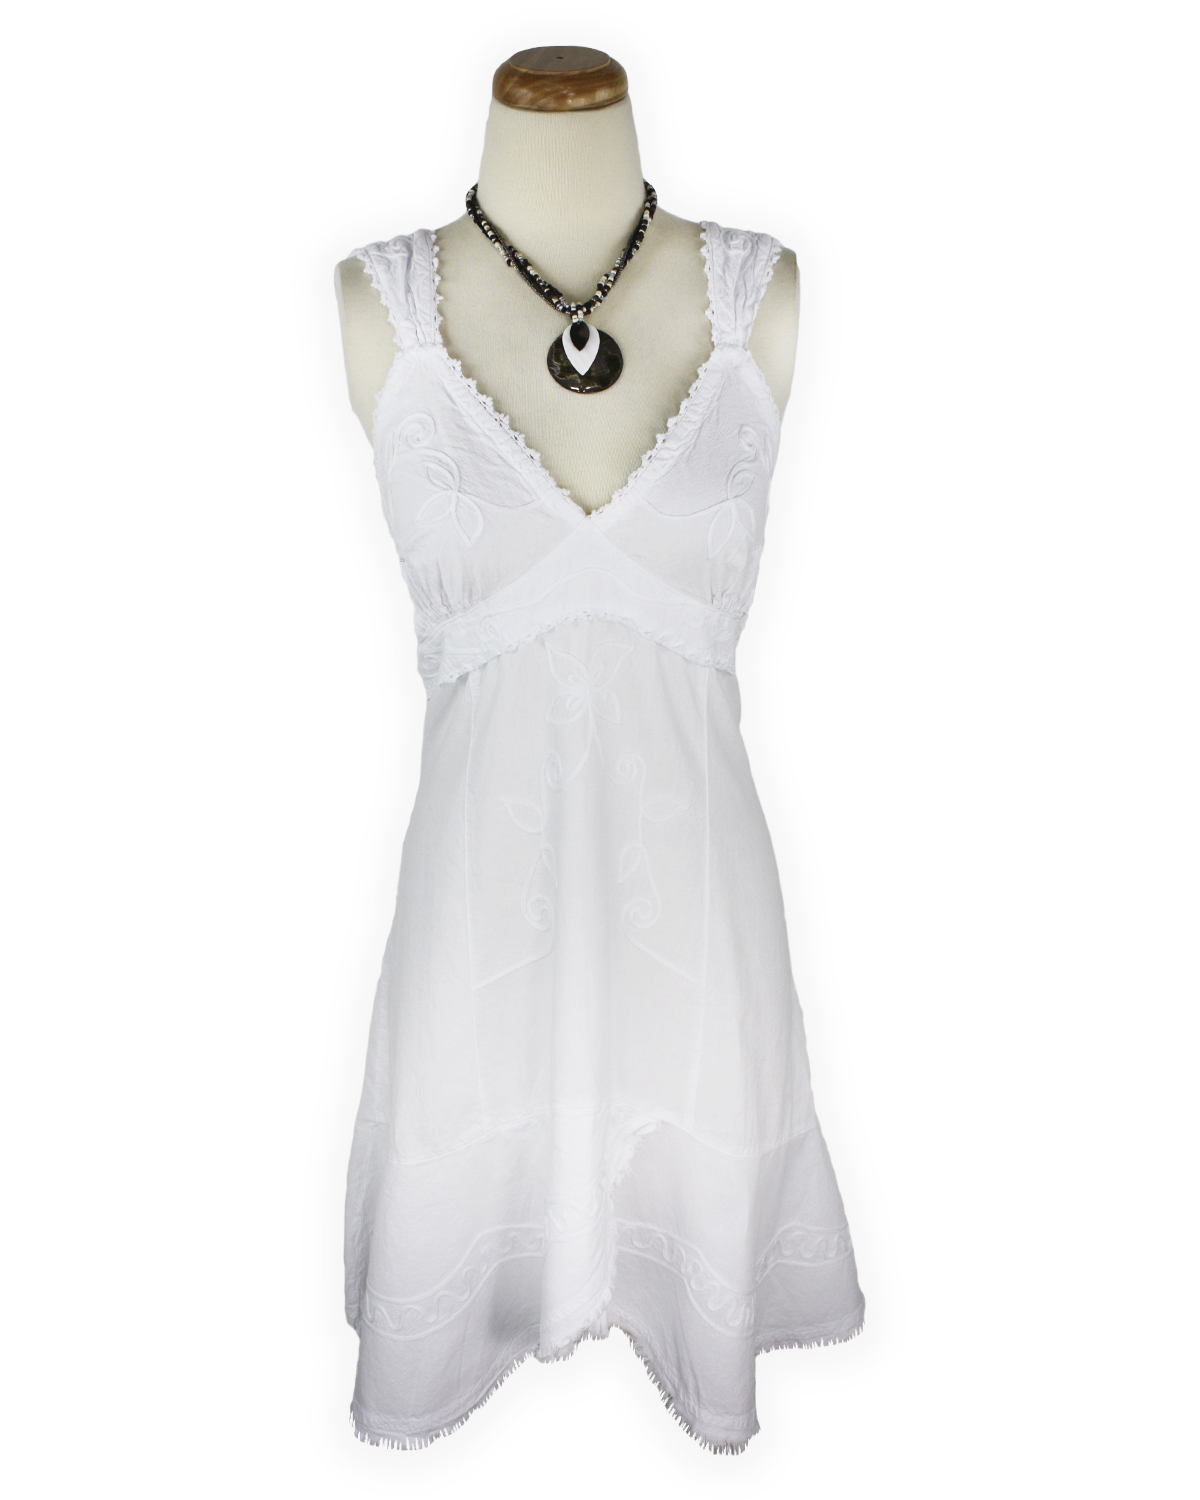 Tropical Short Sundress – Caribbean Beauty – White – front w/necklace